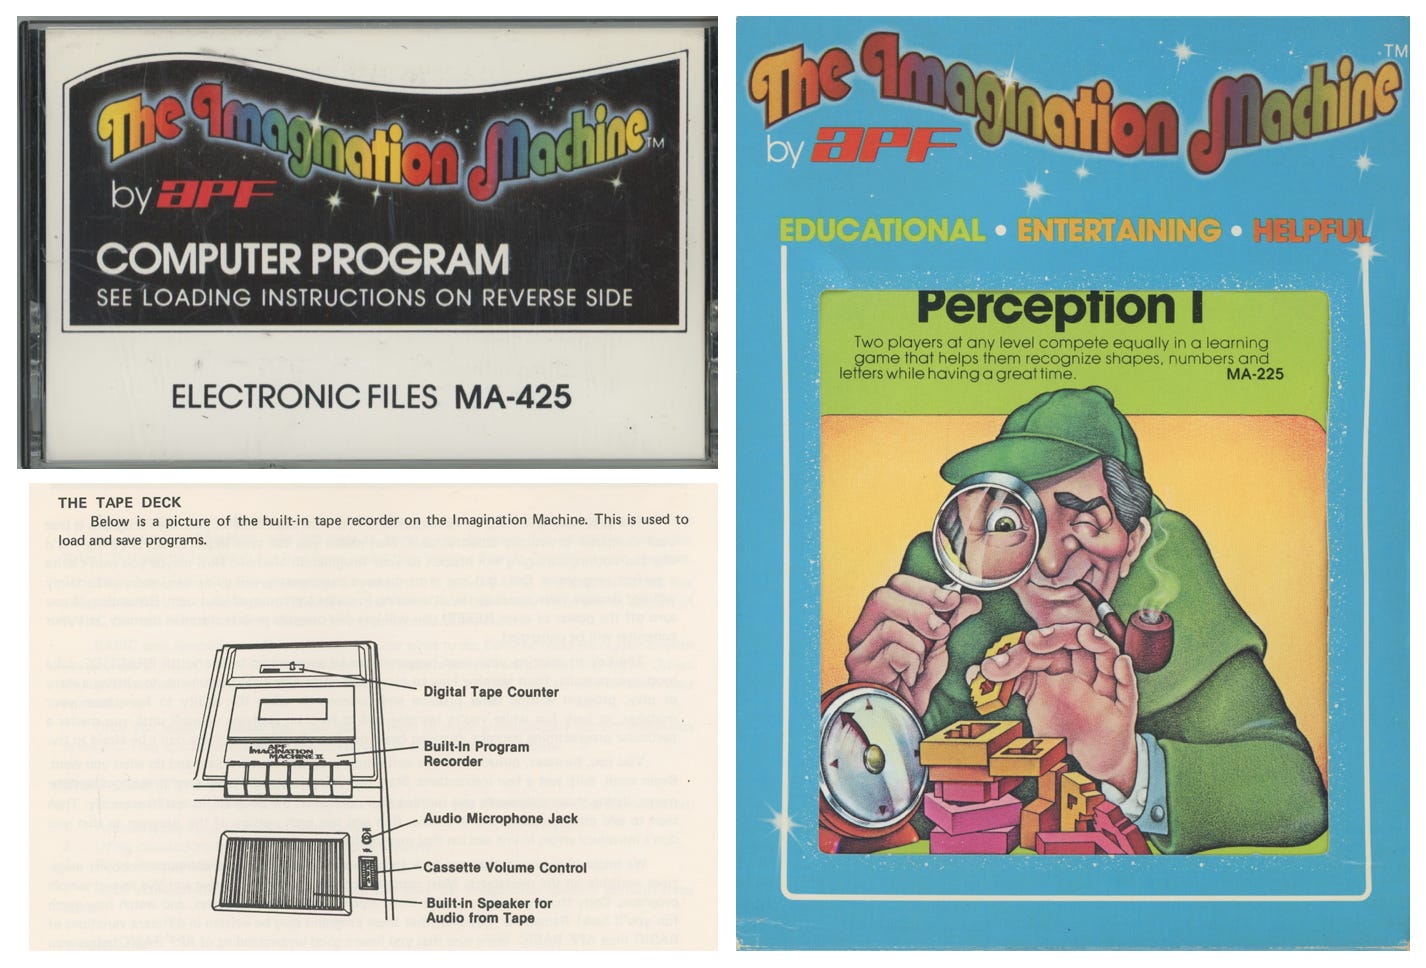 3 images. Top left: a cassette case, program Electronic Files. has the rainbow The Imagination Machine by APF logo. bottom left: a diagram of the Imagination Machine tape deck. Right: software box for the game Perception, with an illustration of a man dressed like sherlock looking through a magnifying glass at a puzzle next to a clock, with the The Imagination Machine rainbow logo across the top.